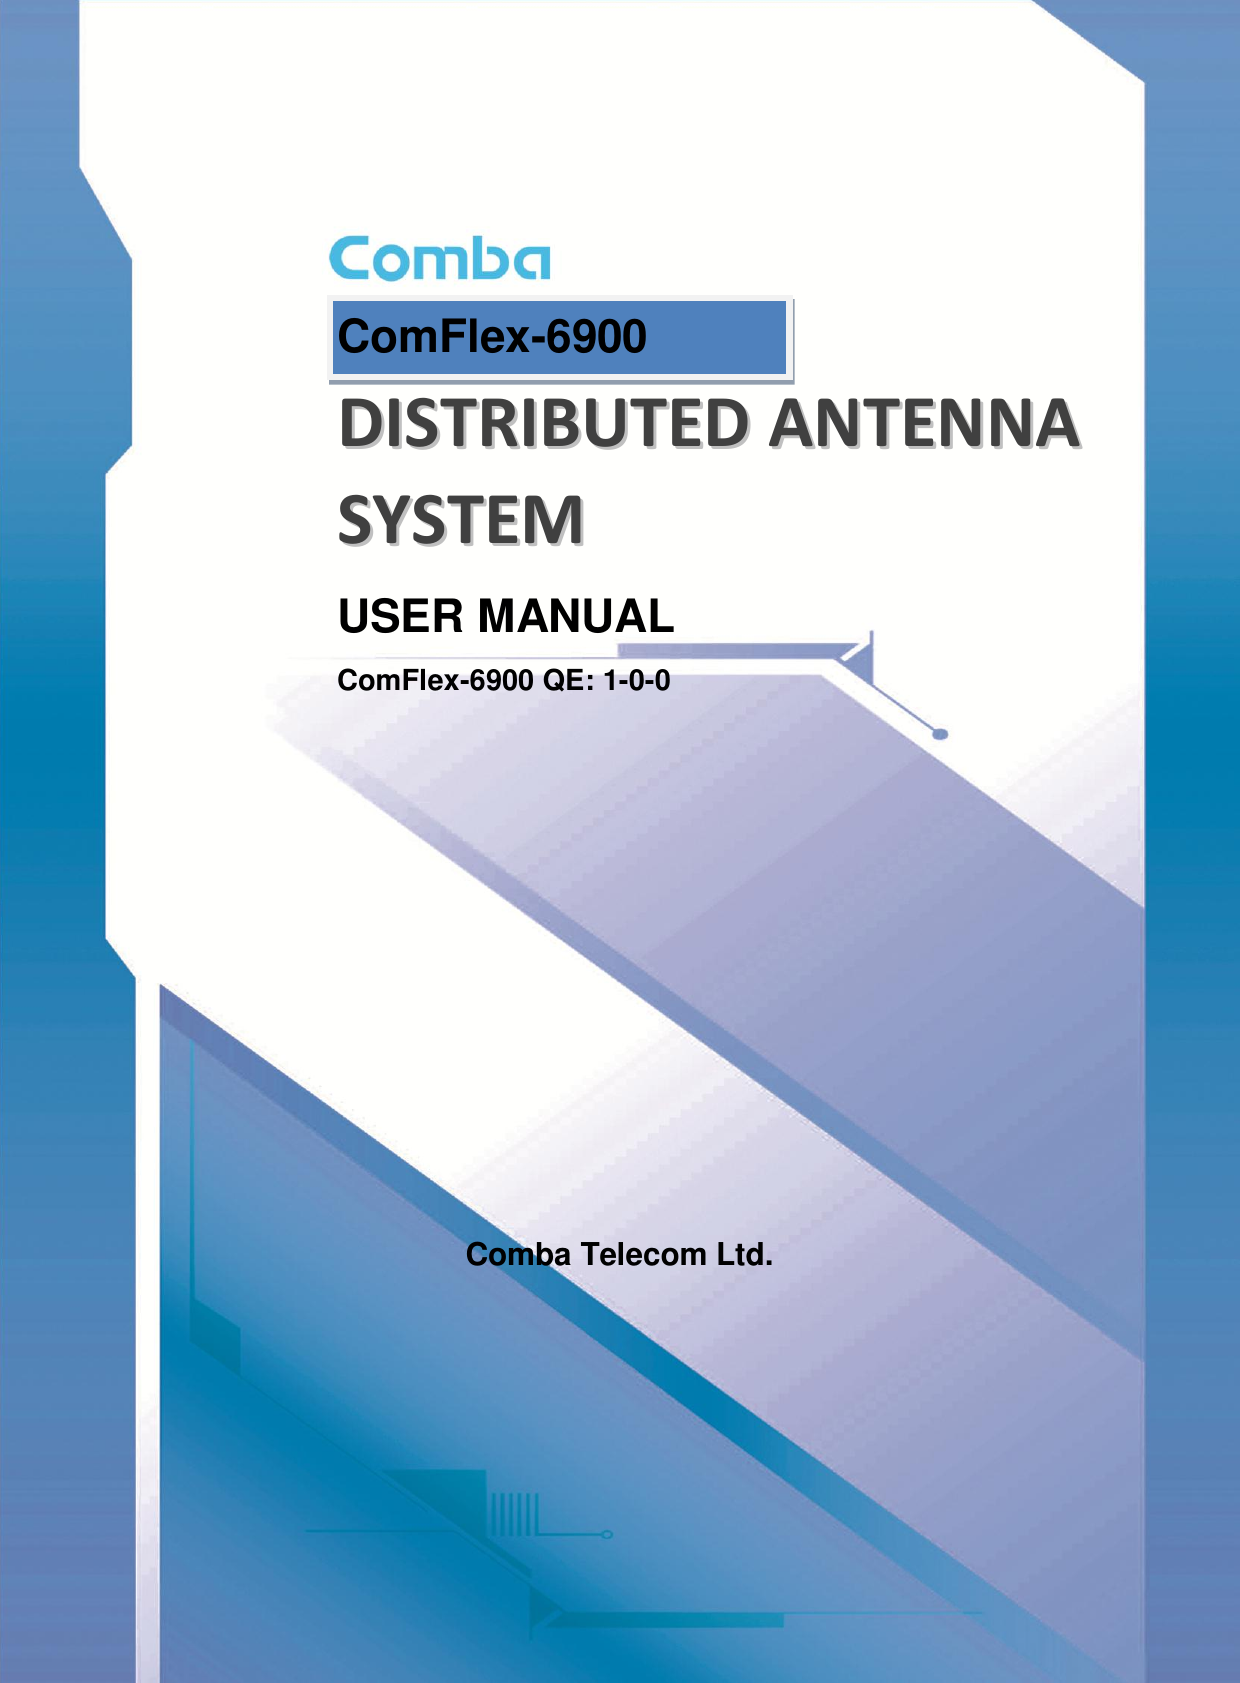 Page 1 of Comba Telecom COMFLEX-6900 ComFlex Series Distributed Antenna System User Manual 